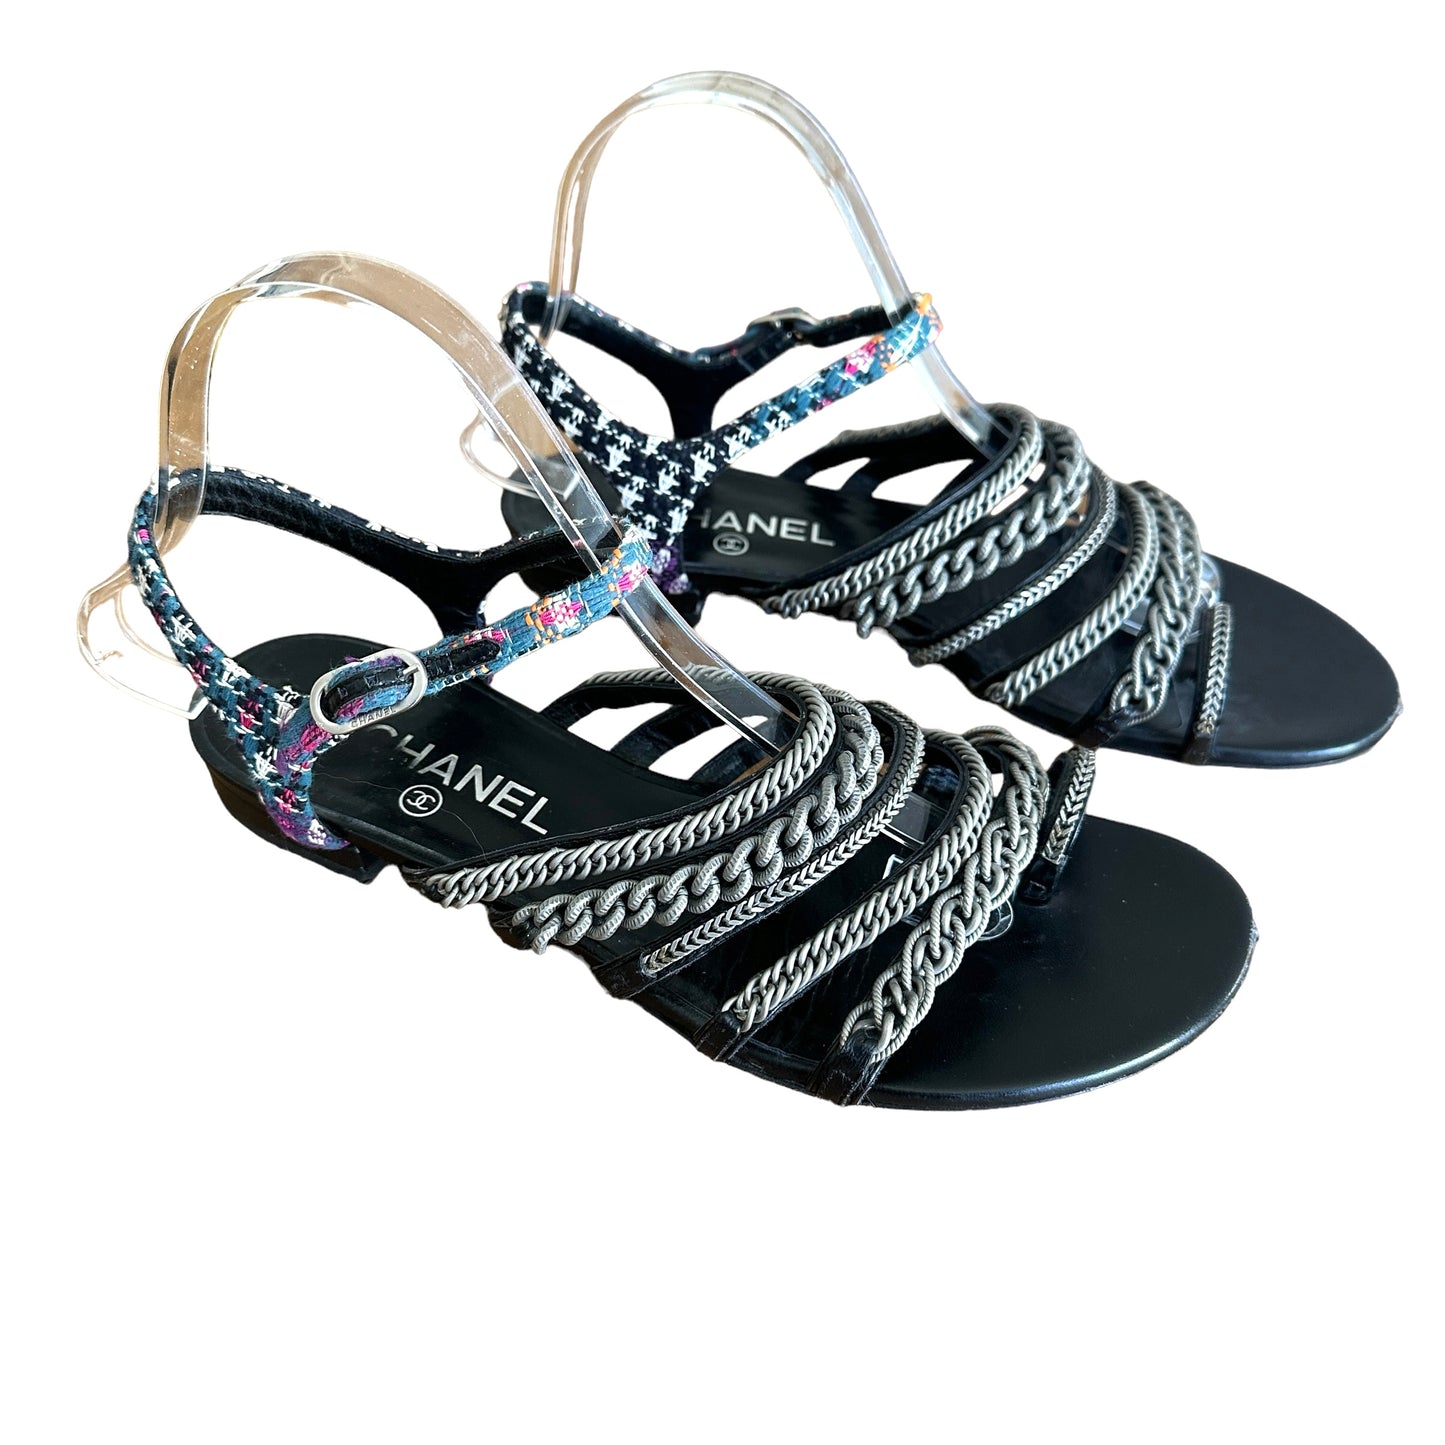 Chained Sandals - 9